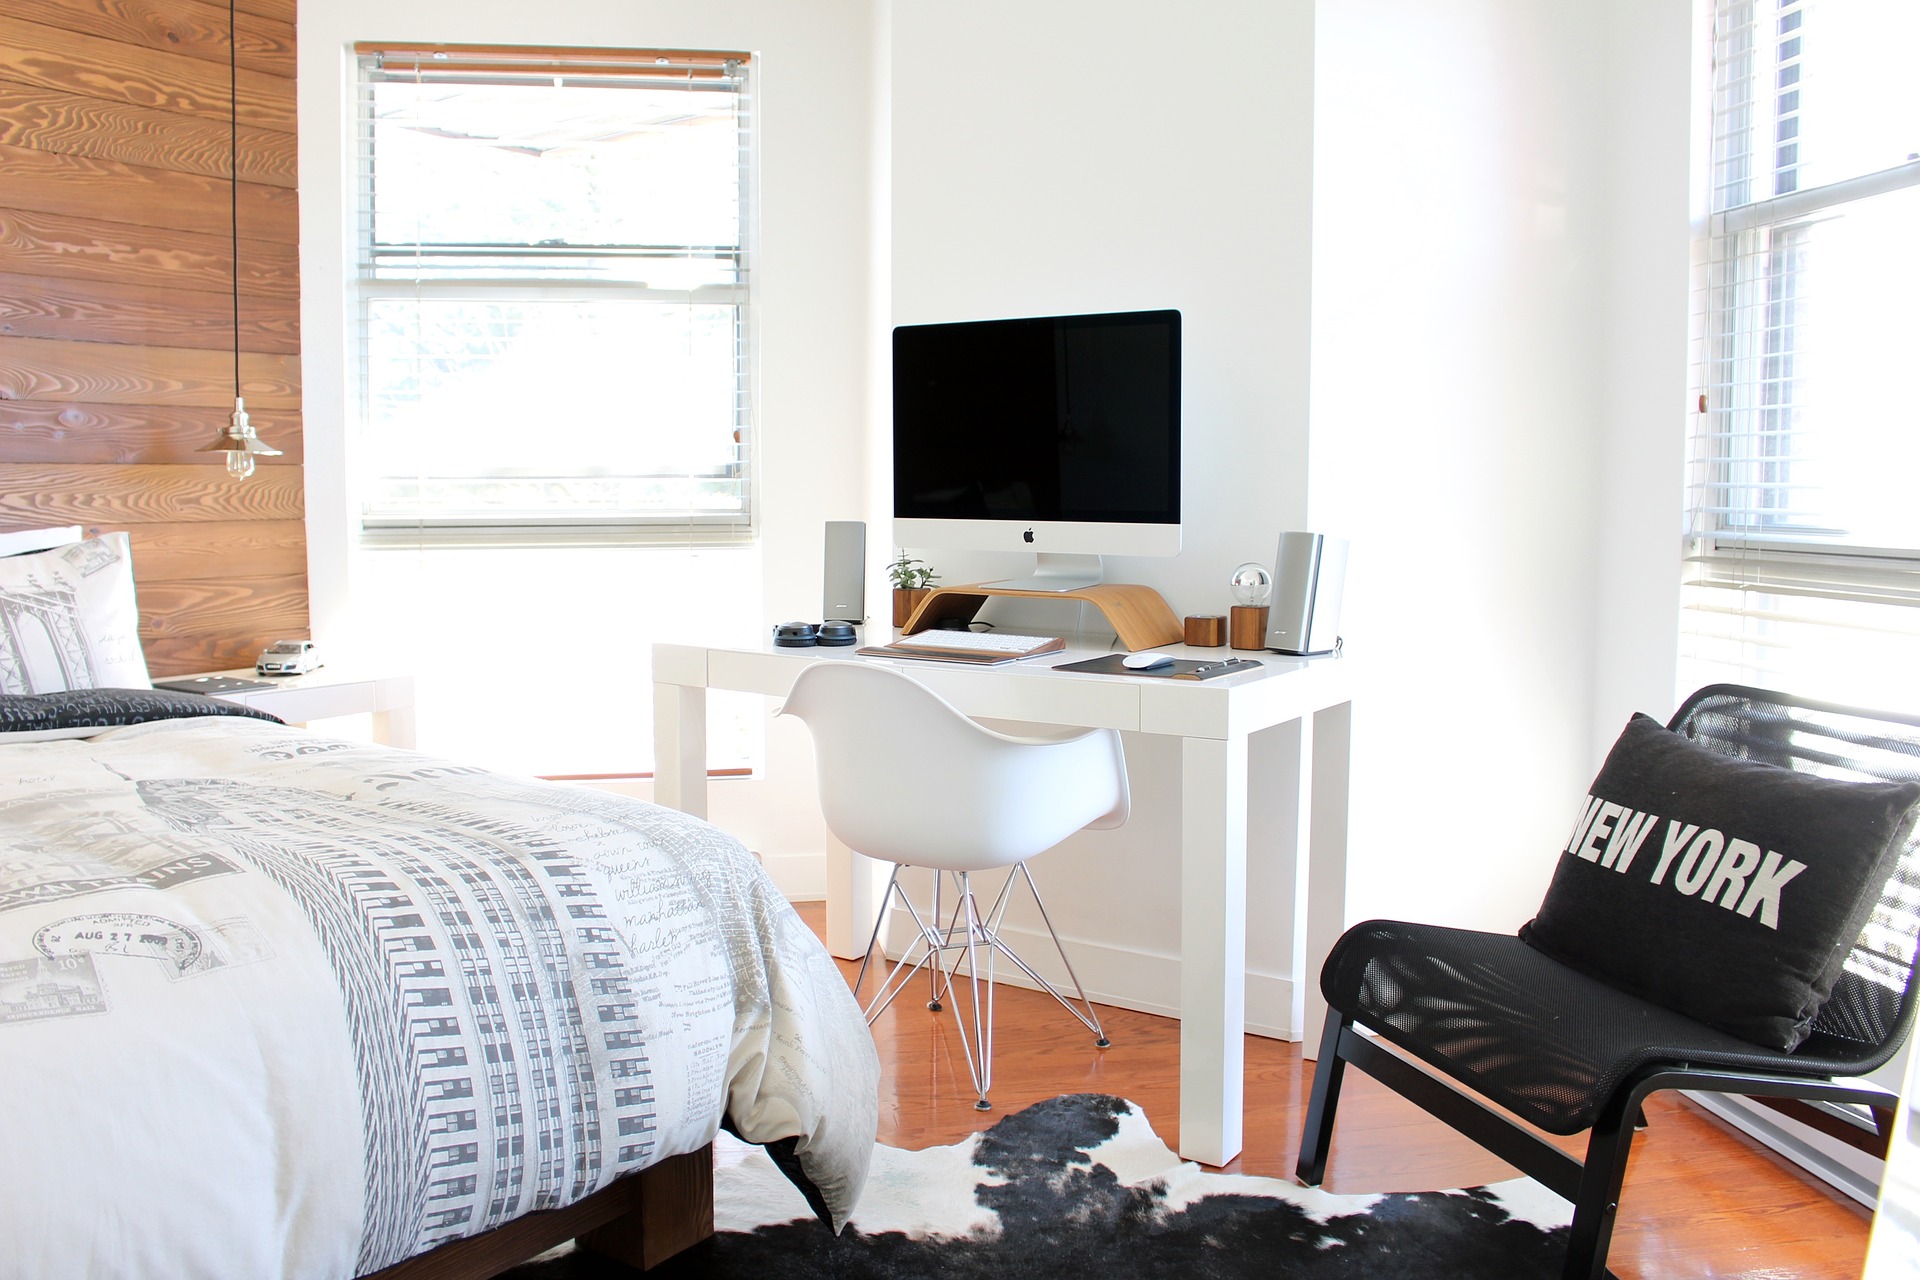 Dorm Décor Delight: 7 Ways to Personalize Your Space and Make It Feel Like Home